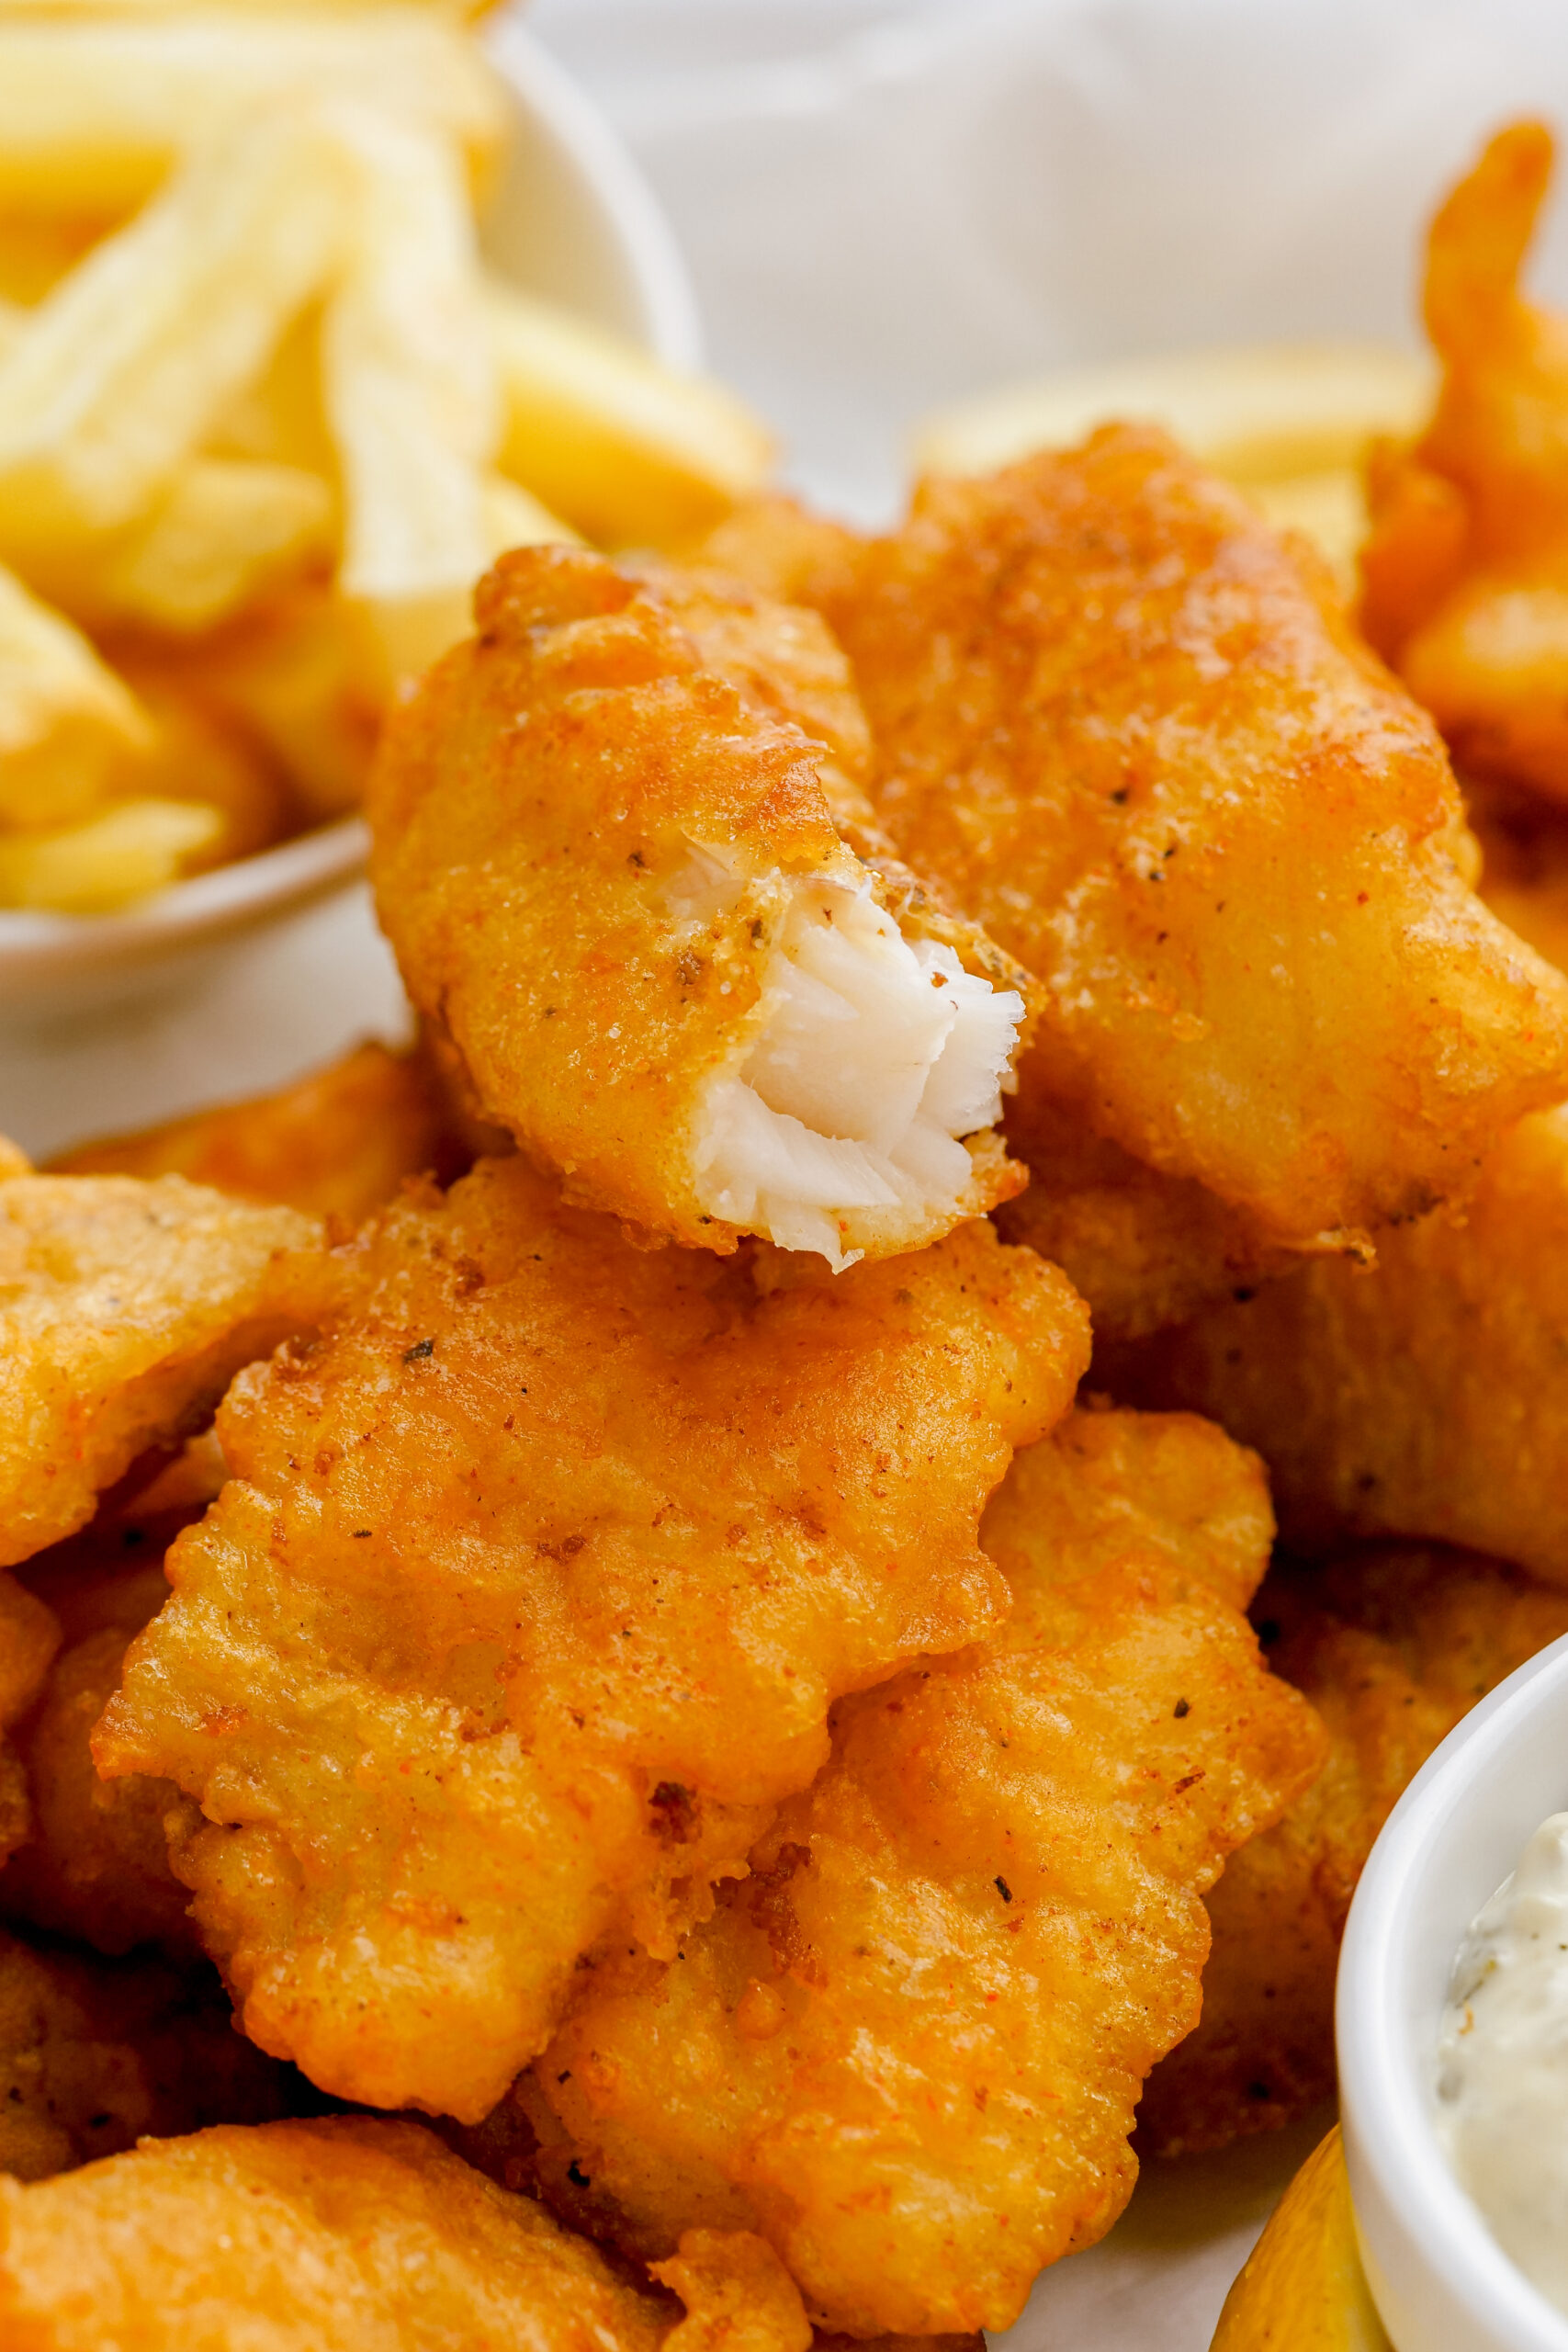 Crispy Fish and Chips - Simply Delicious